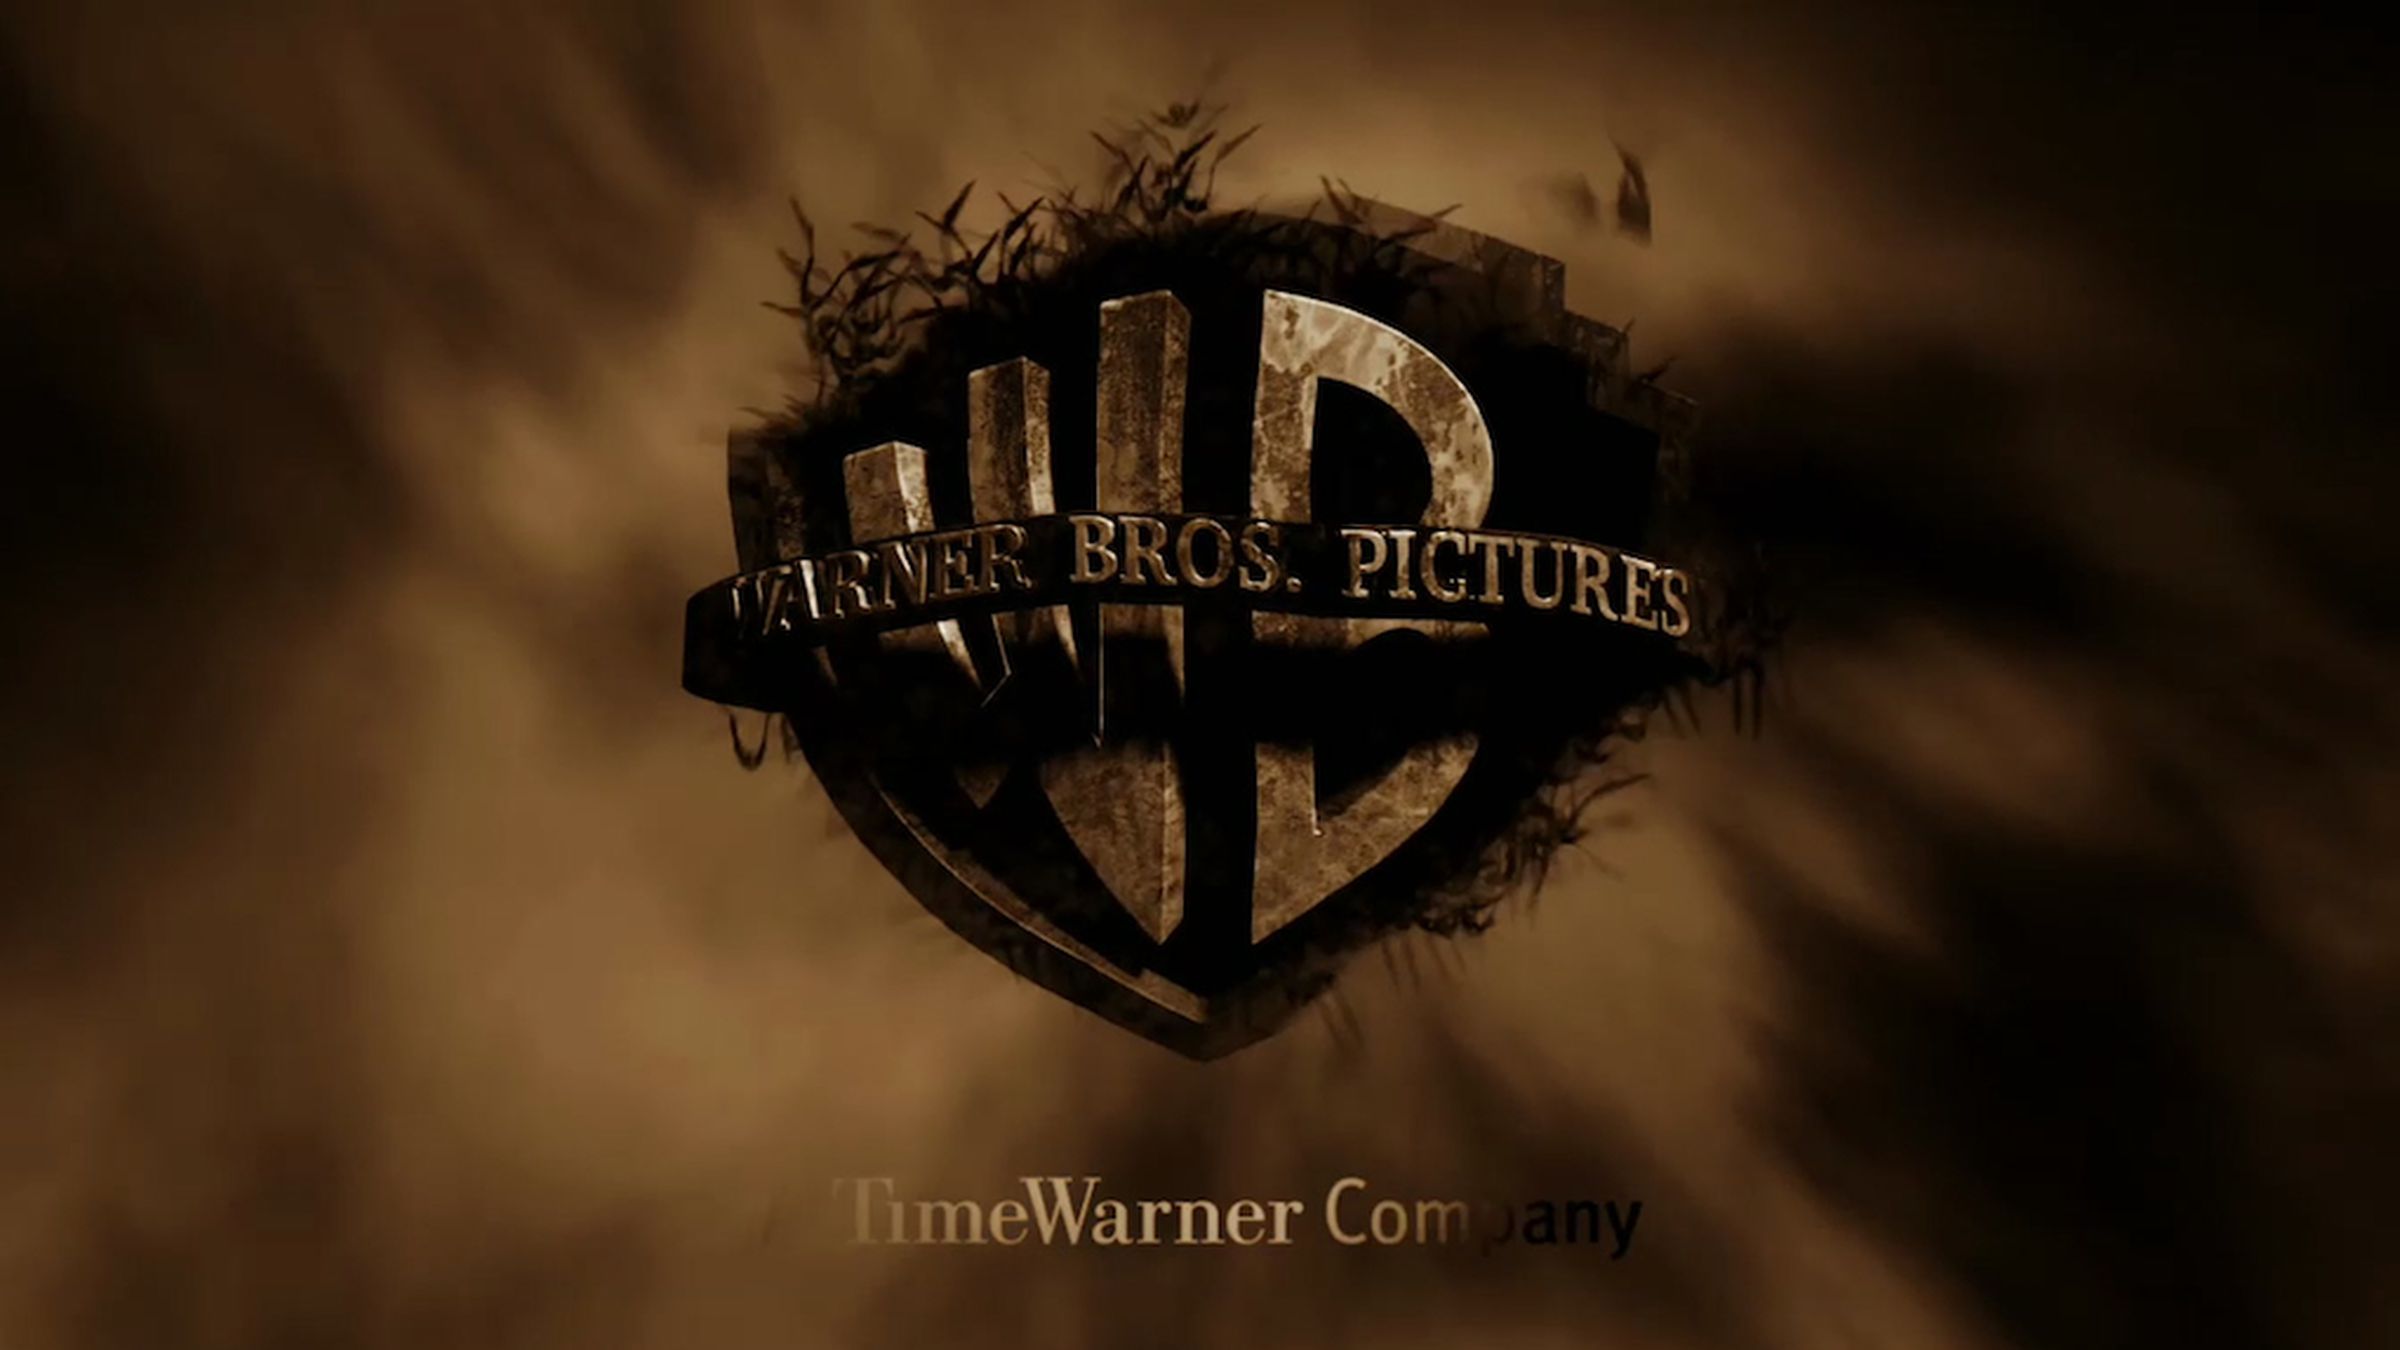 History of the Warner Bros. Pictures logo